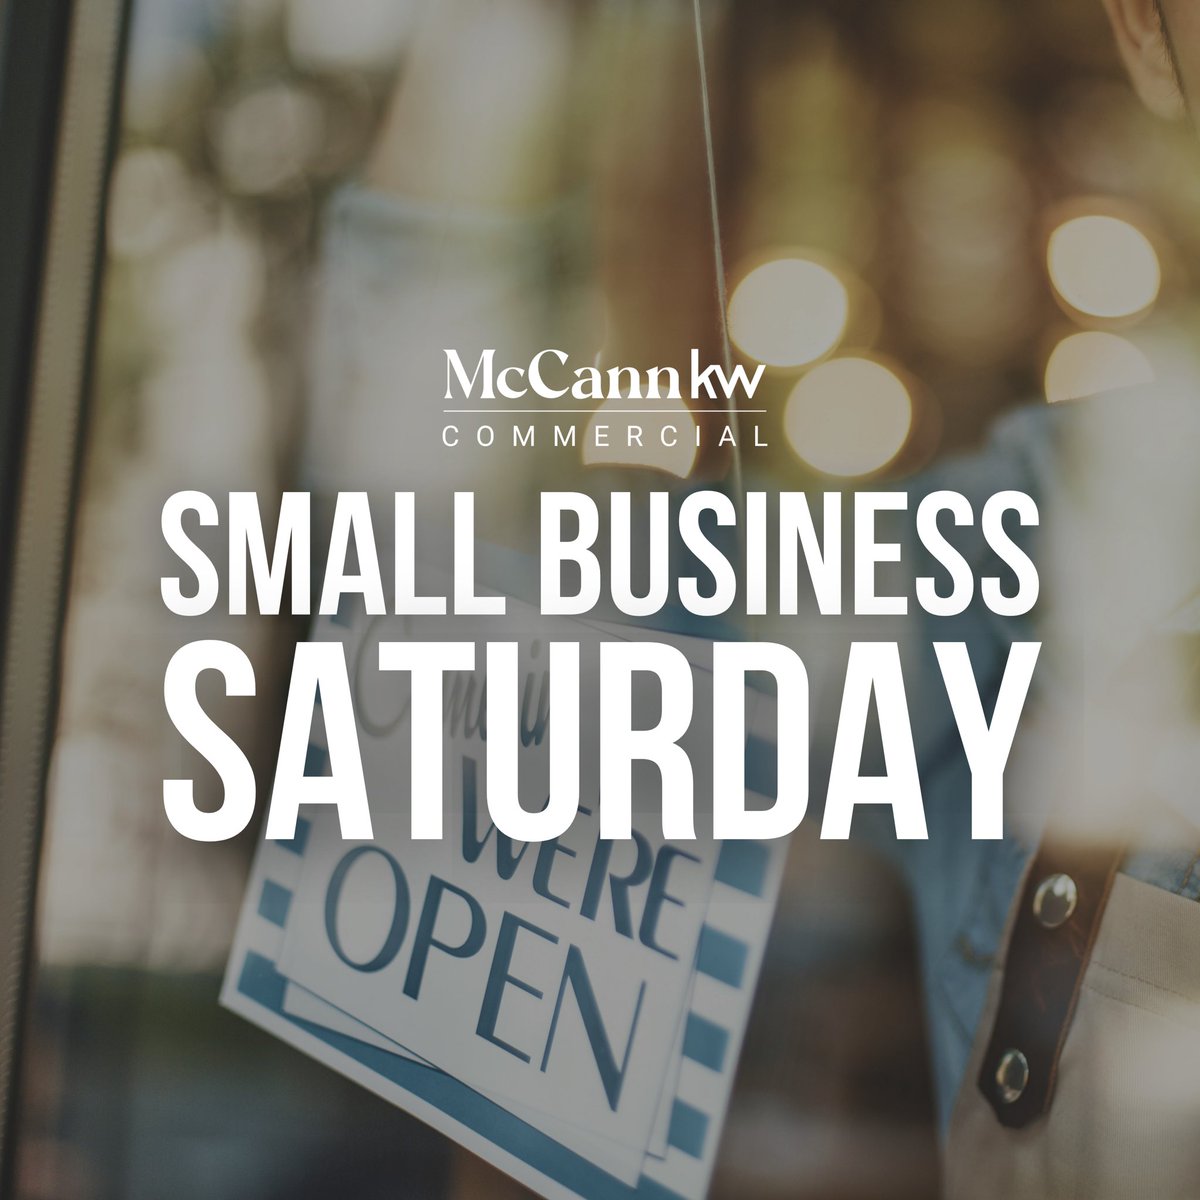 Happy Small Business Saturday! 🛍️

Celebrating the amazing small businesses we’ve had the privilege to work with. 

Be sure to check them out in this thread ⬇️

#SmallBusinessSaturday #NJSmallBusiness #PhillySmallBusiness #PASmallBusiness #supportlocal